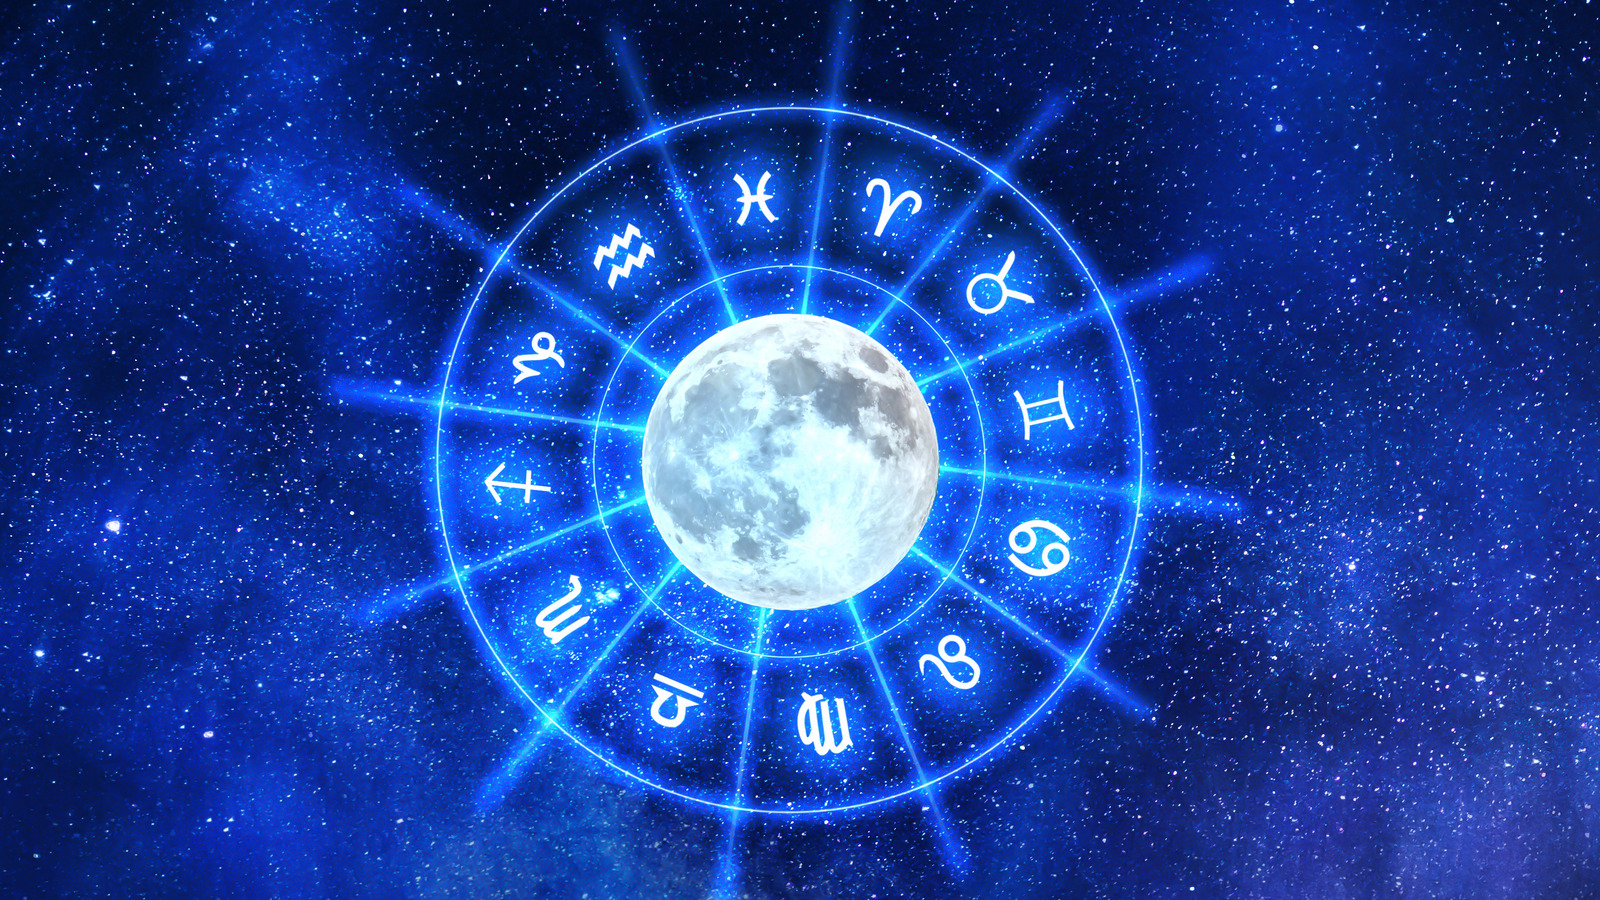 How The September 25 New Moon Will Affect You If You're An Aries